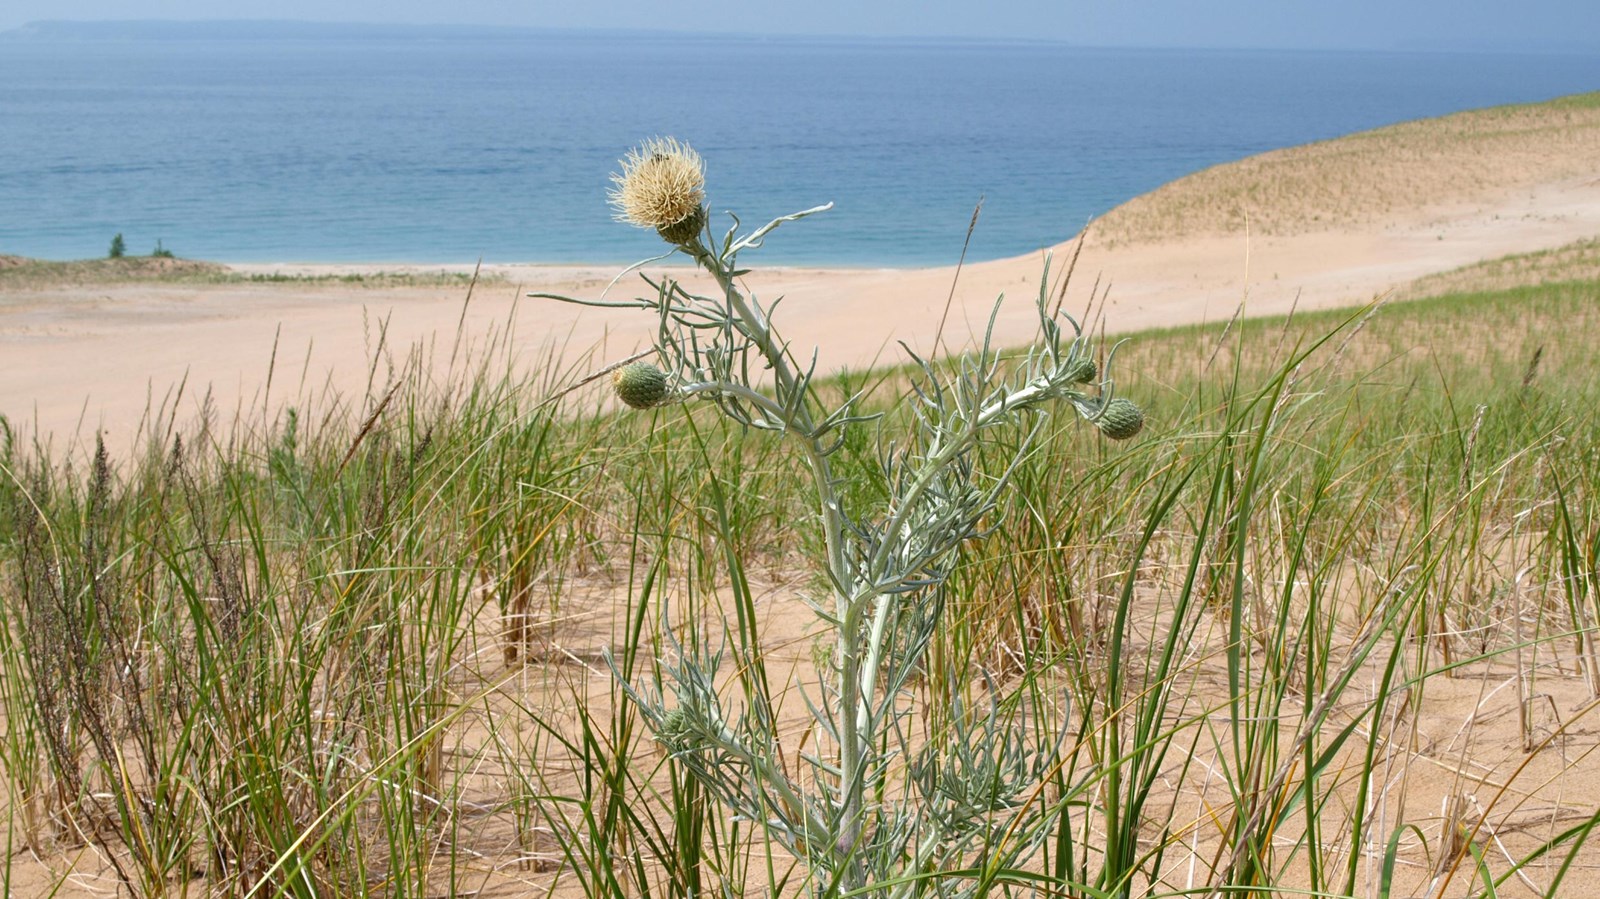 Spiky pink-flowered plant with silver leaves on a dune with blue lake in background